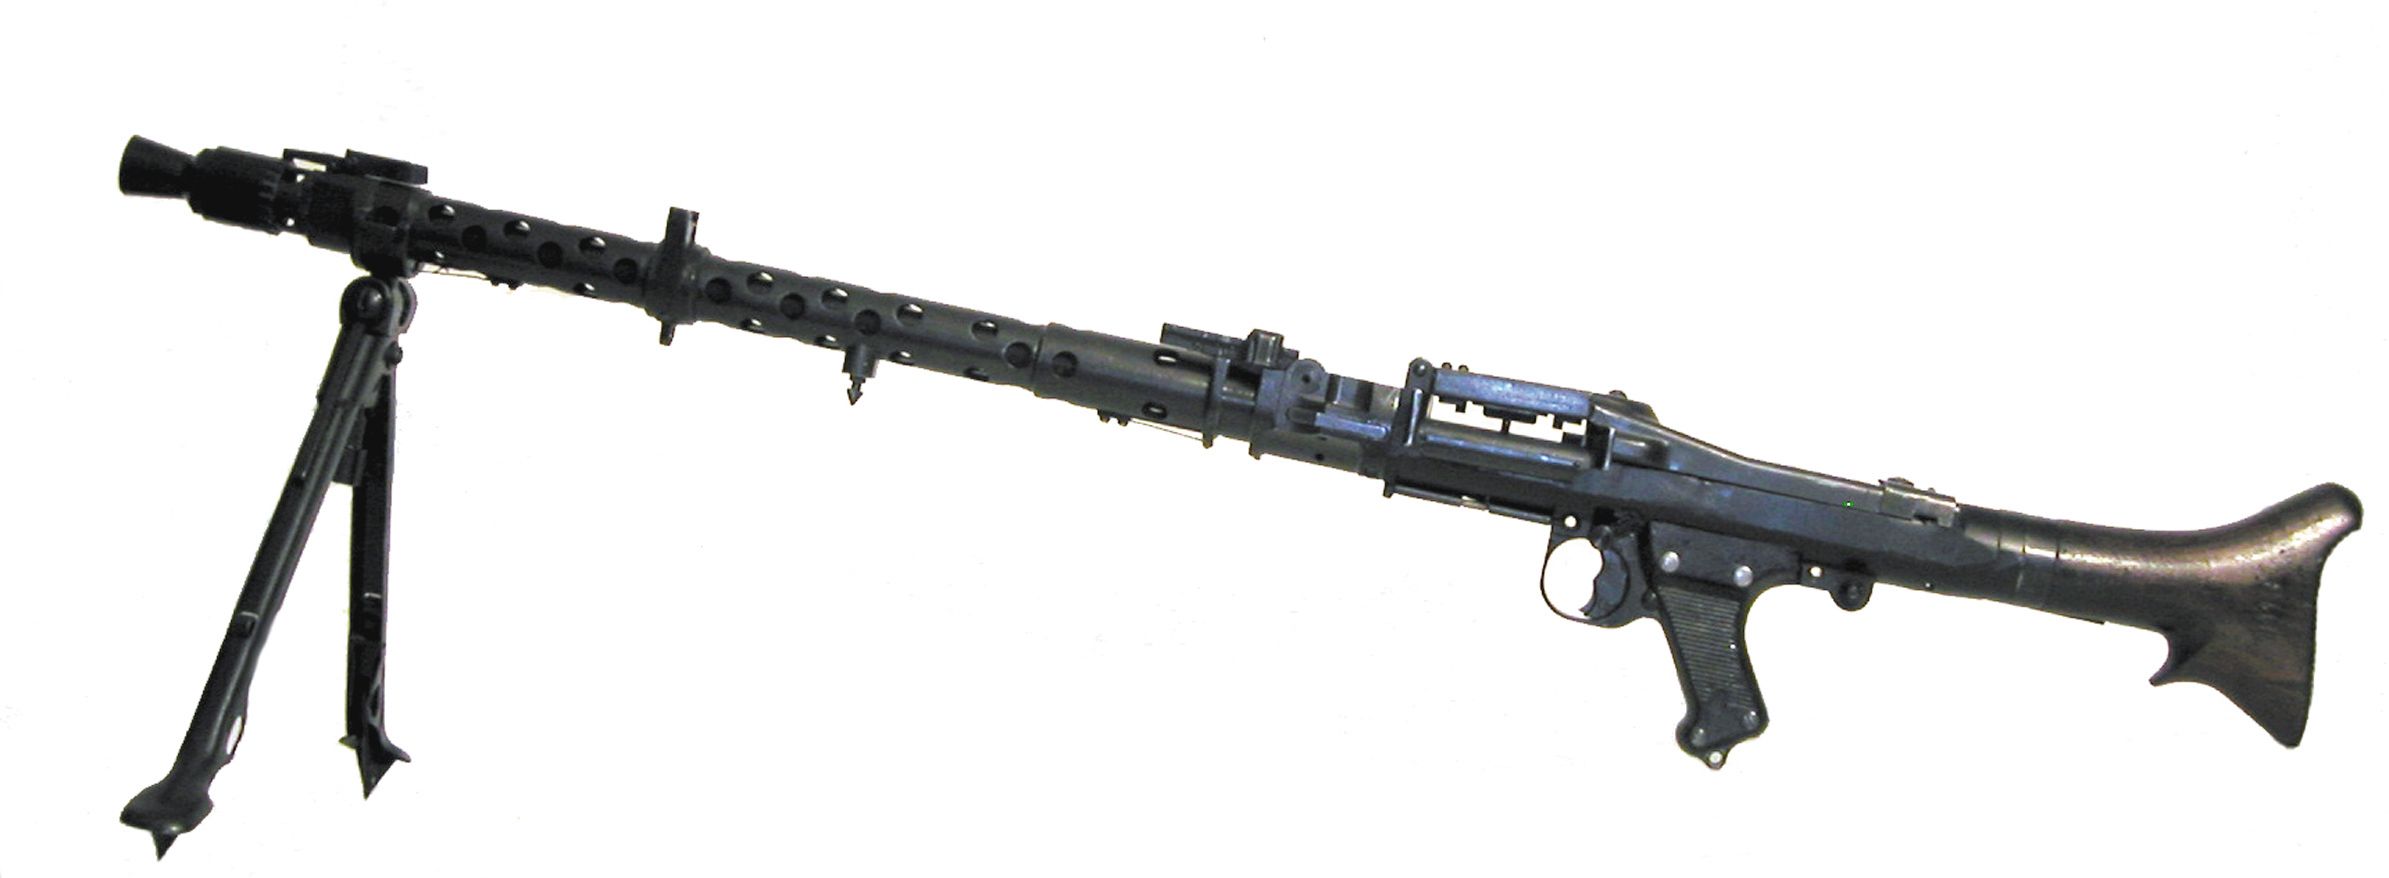 German MG-34 light machine gun with bipod. The model has a solid “dummy” receiver that cannot fire or chamber live ammunition.